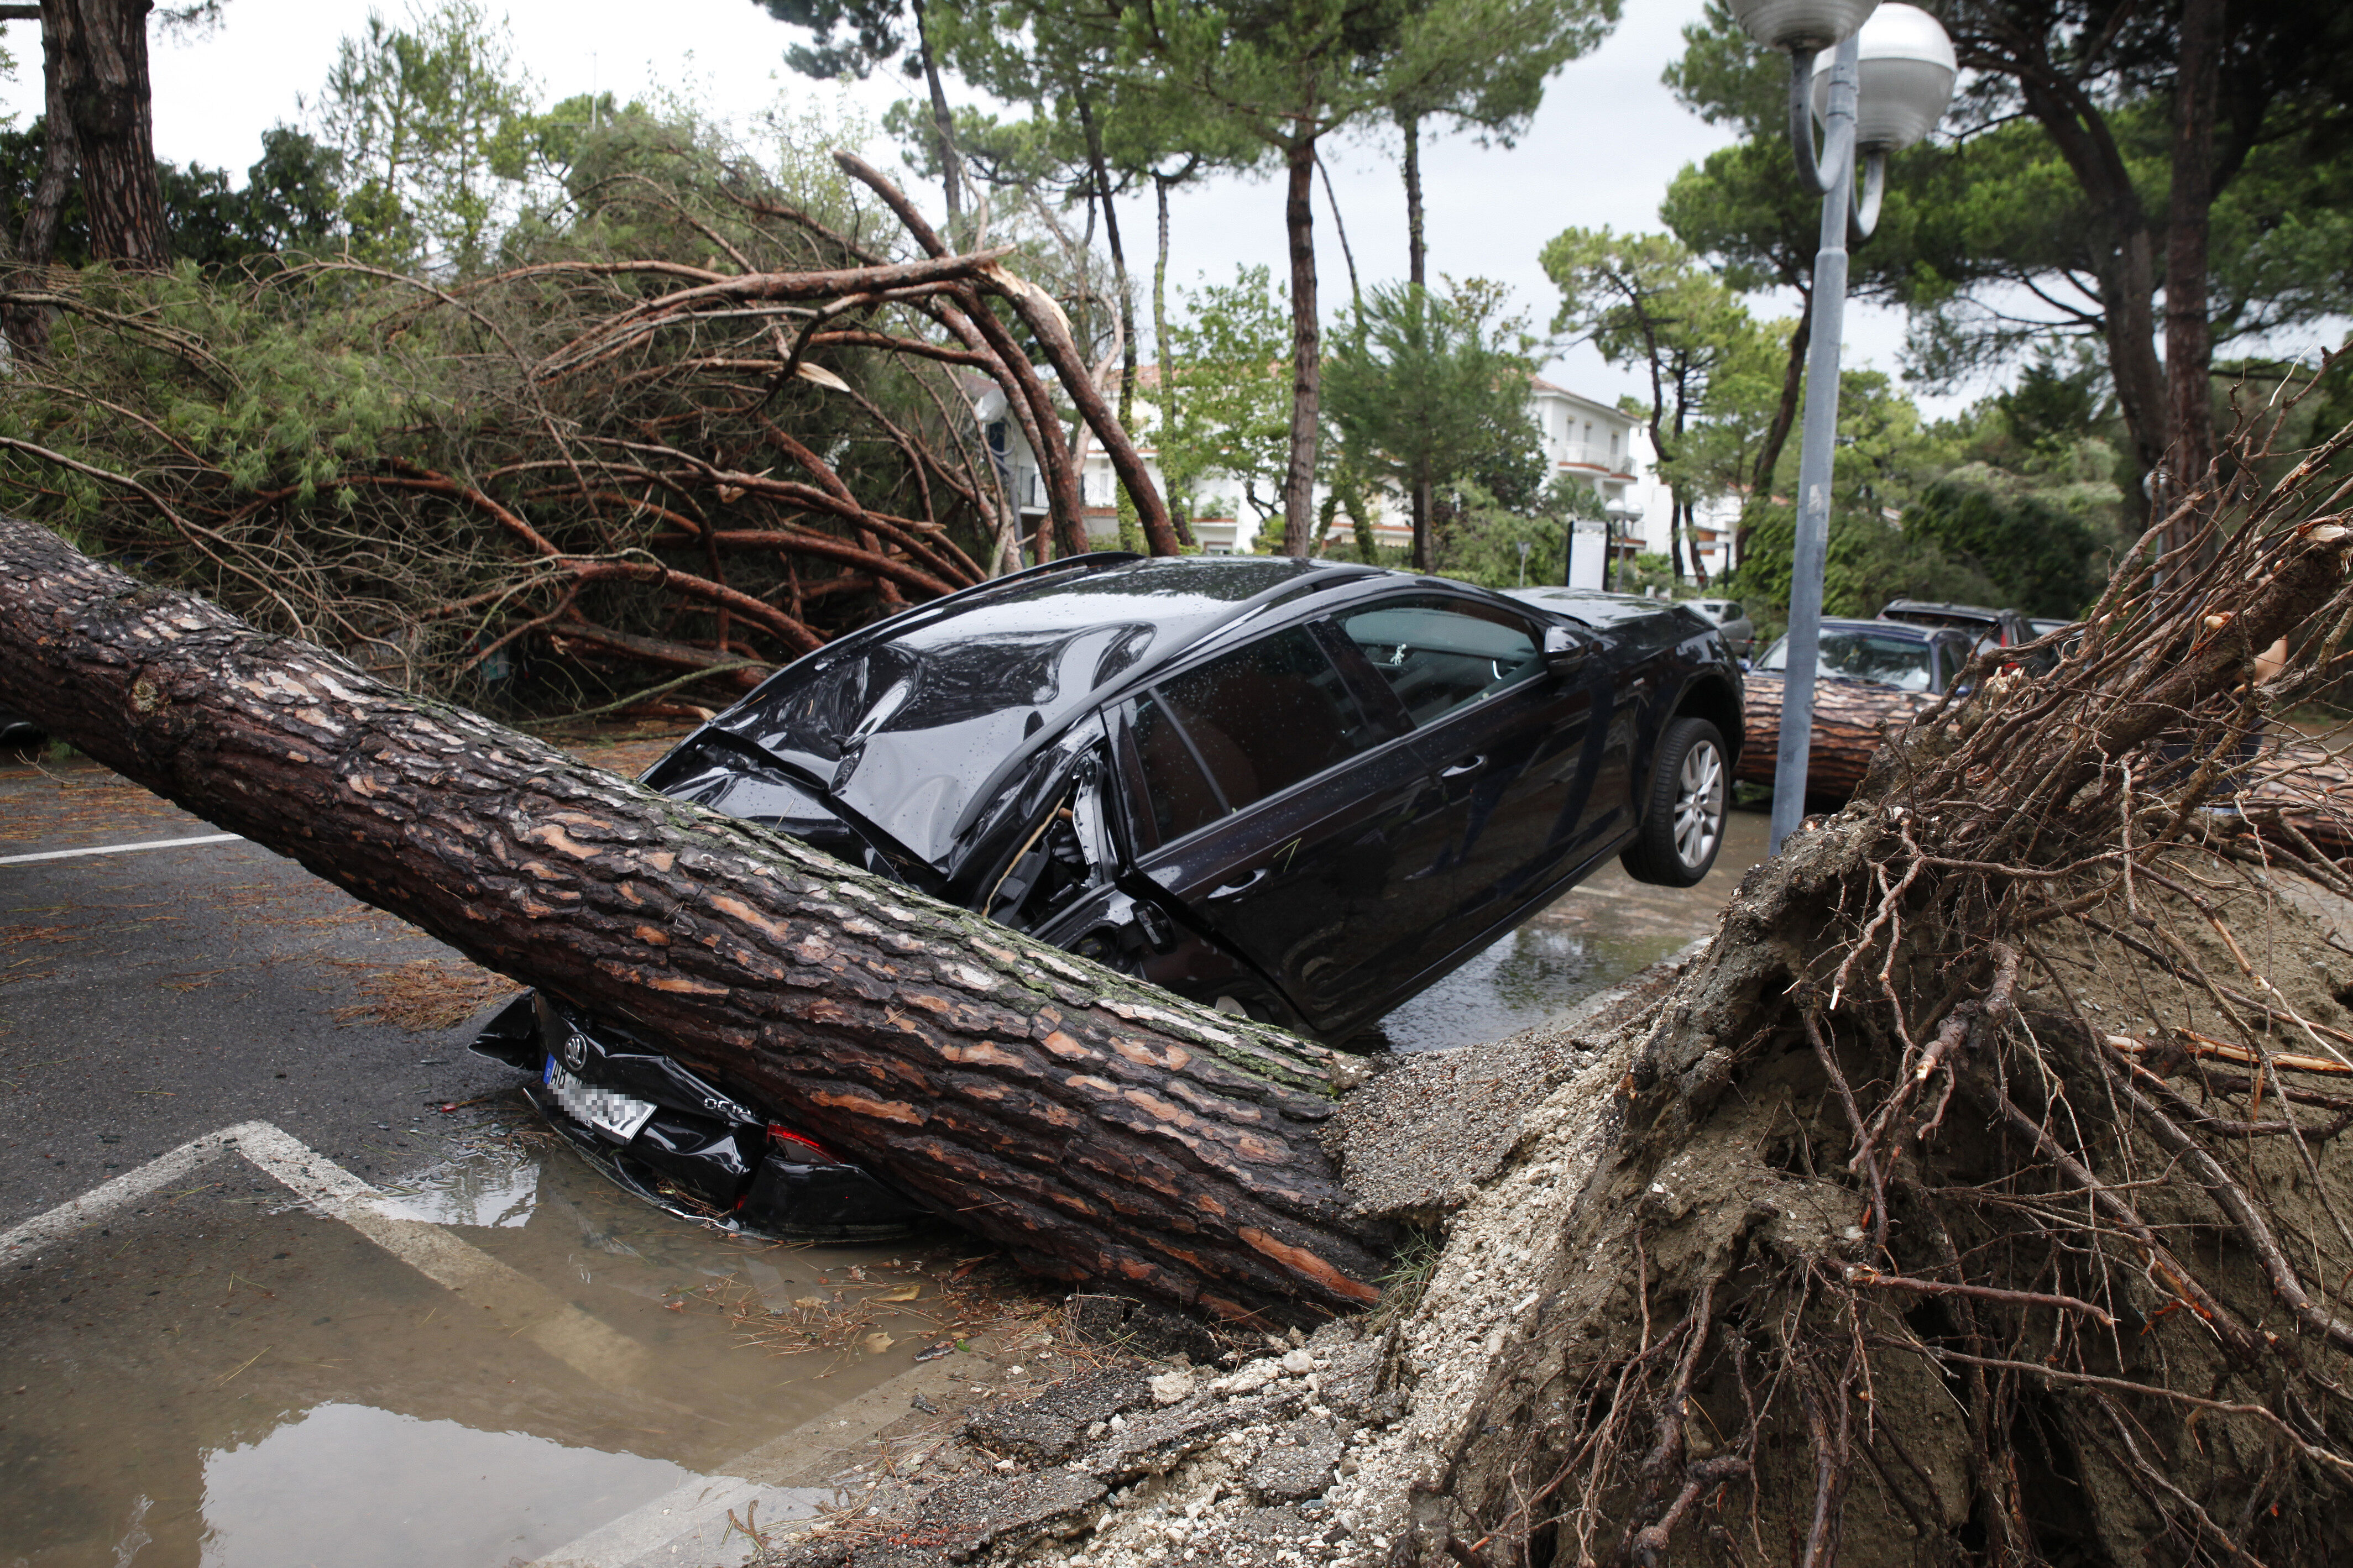 Severe weather damage in Europe